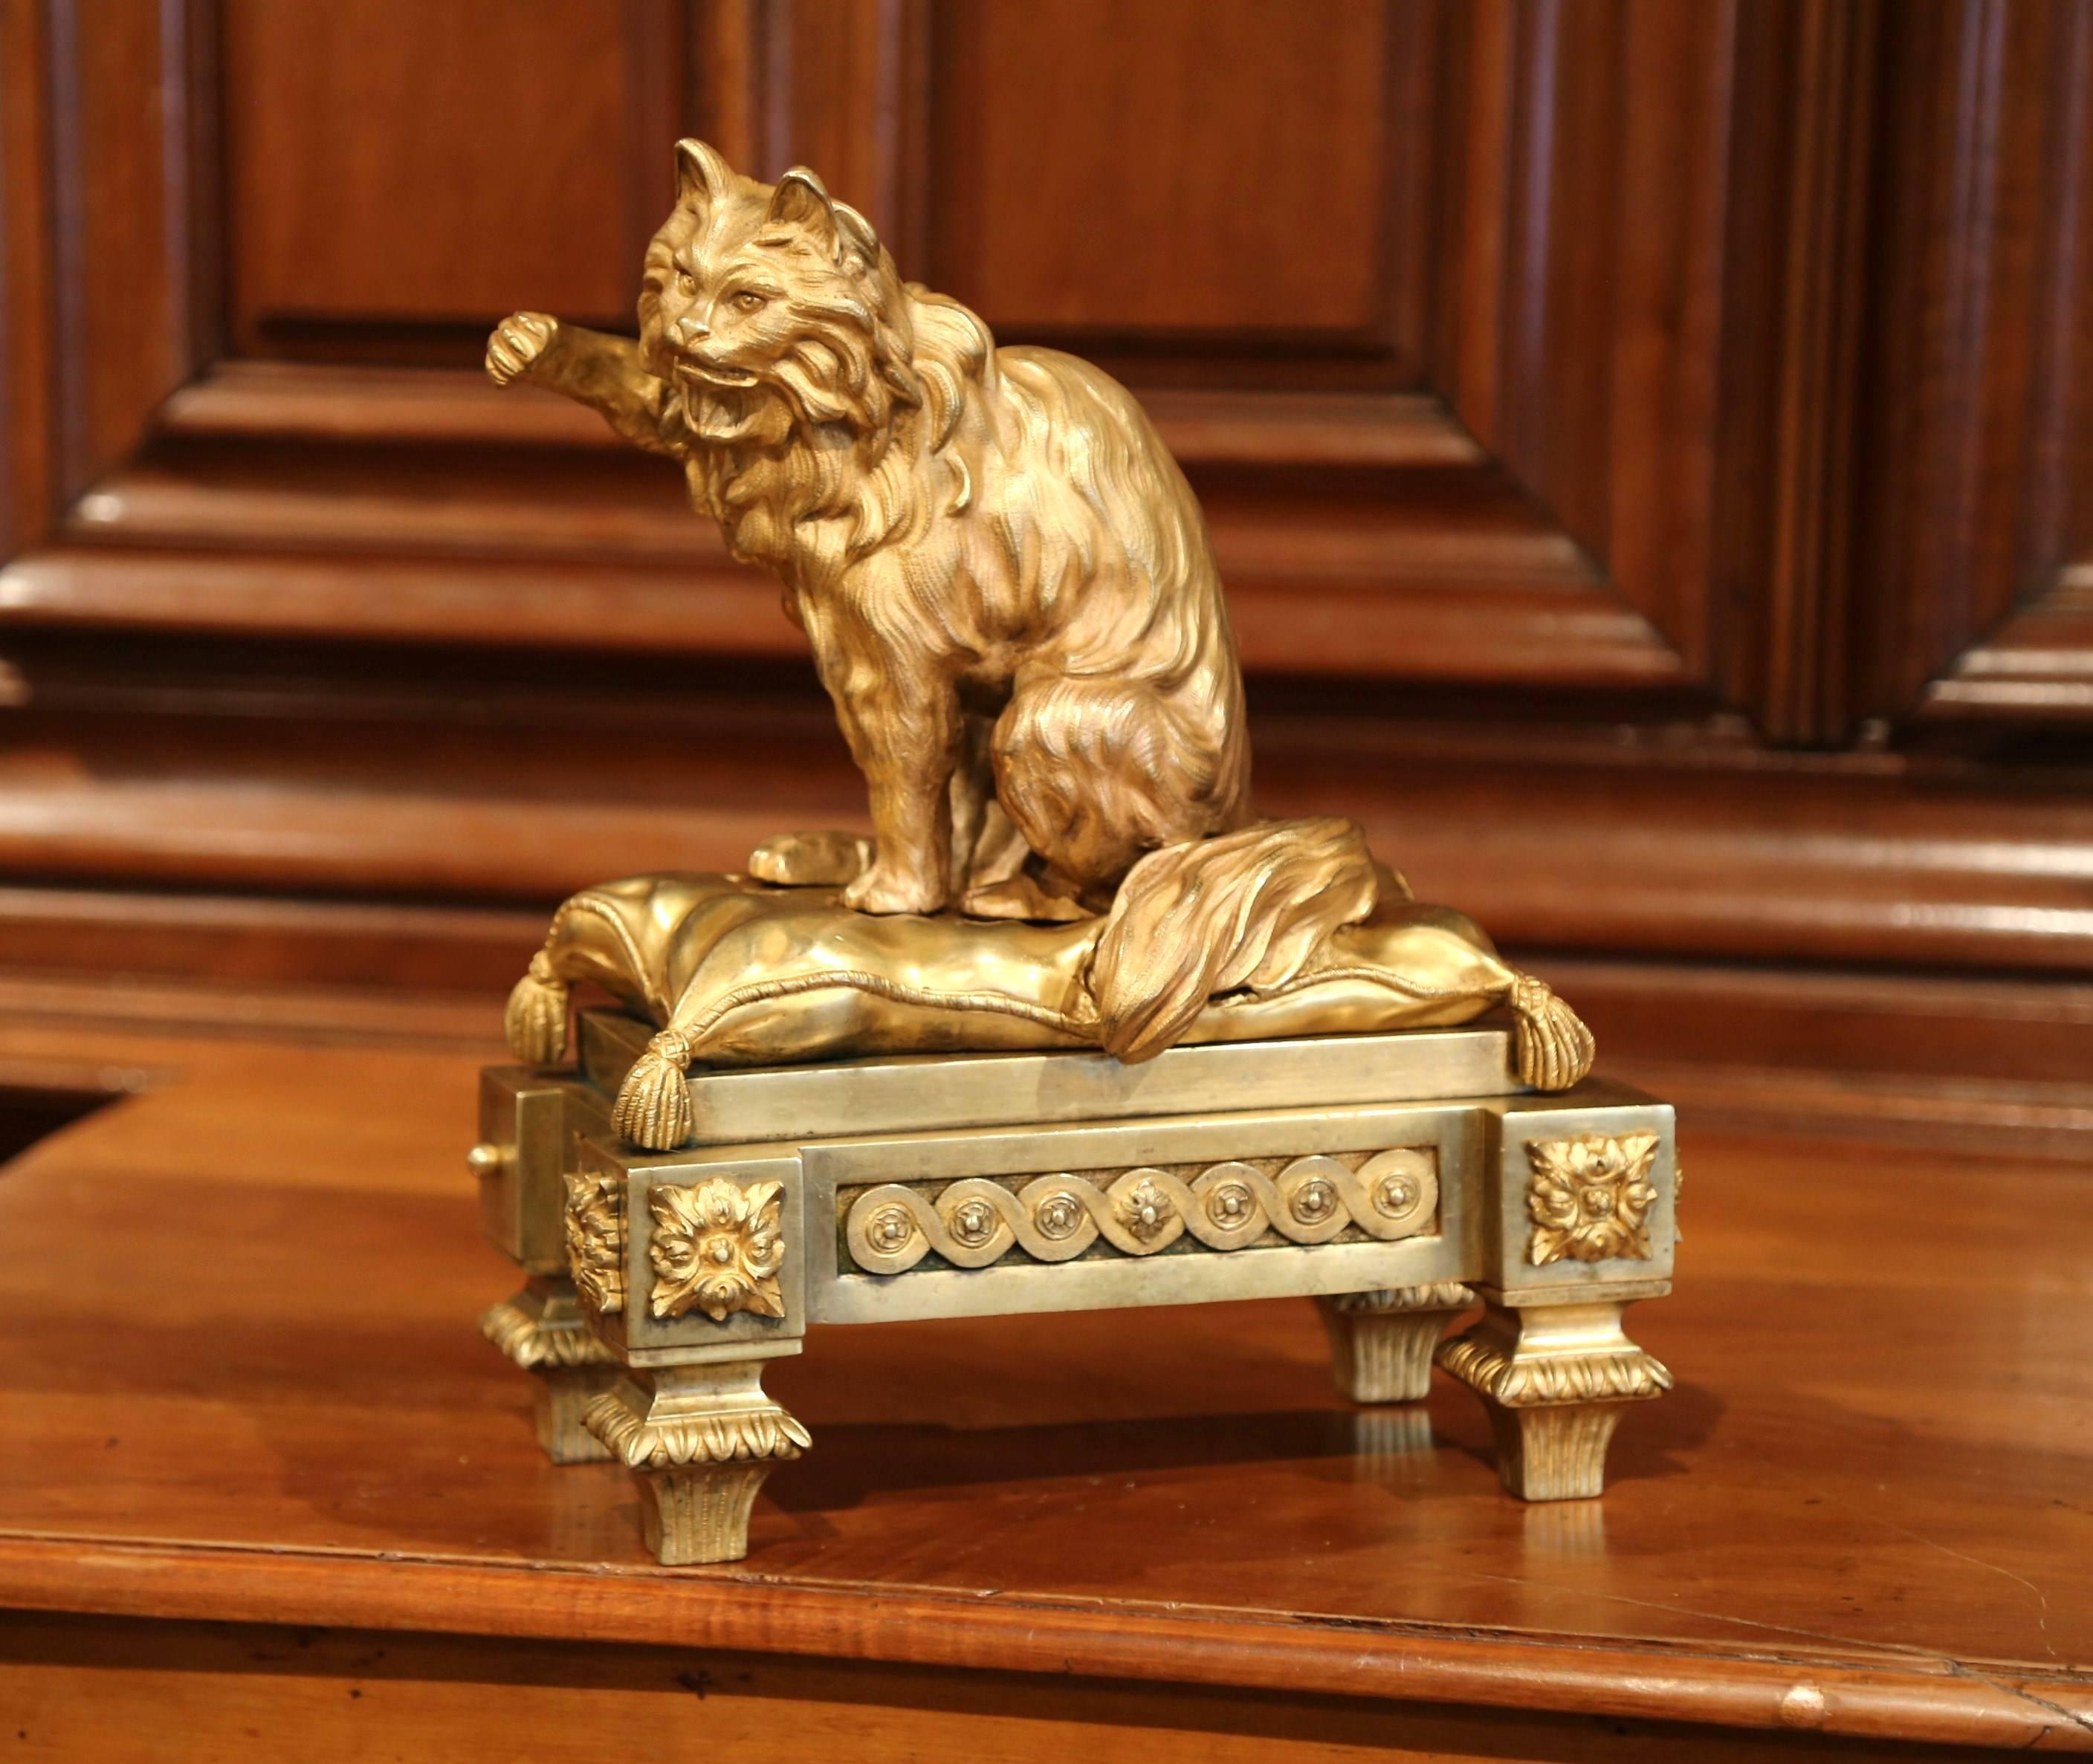 Decorate a shelf in a study with this elegant antique cat bronze sculpture from France. Crafted circa 1840, the feline figure sits on a pillow with his right paw up. The bronze cat sculpture is situated on an ornate base with four small tapered feet